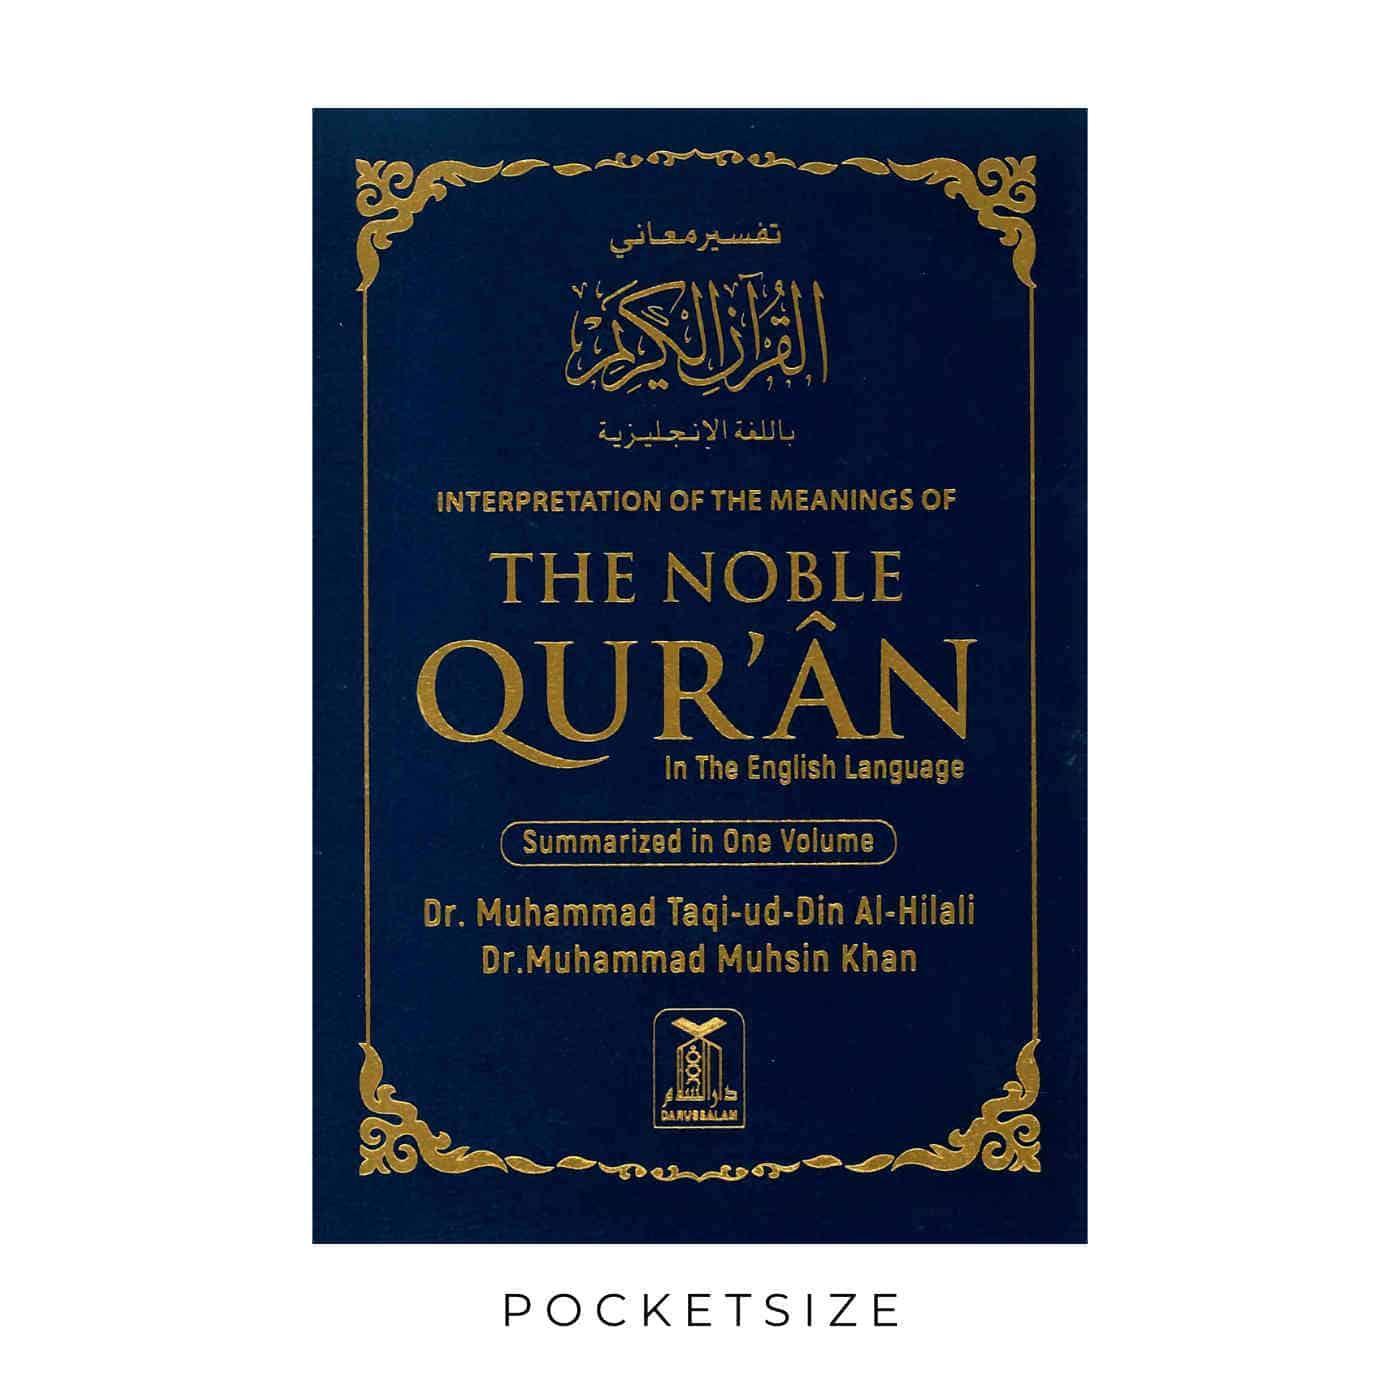 Interpretation Of The Meanings Of The Noble Qur'an In The English Language (Pocket Size)